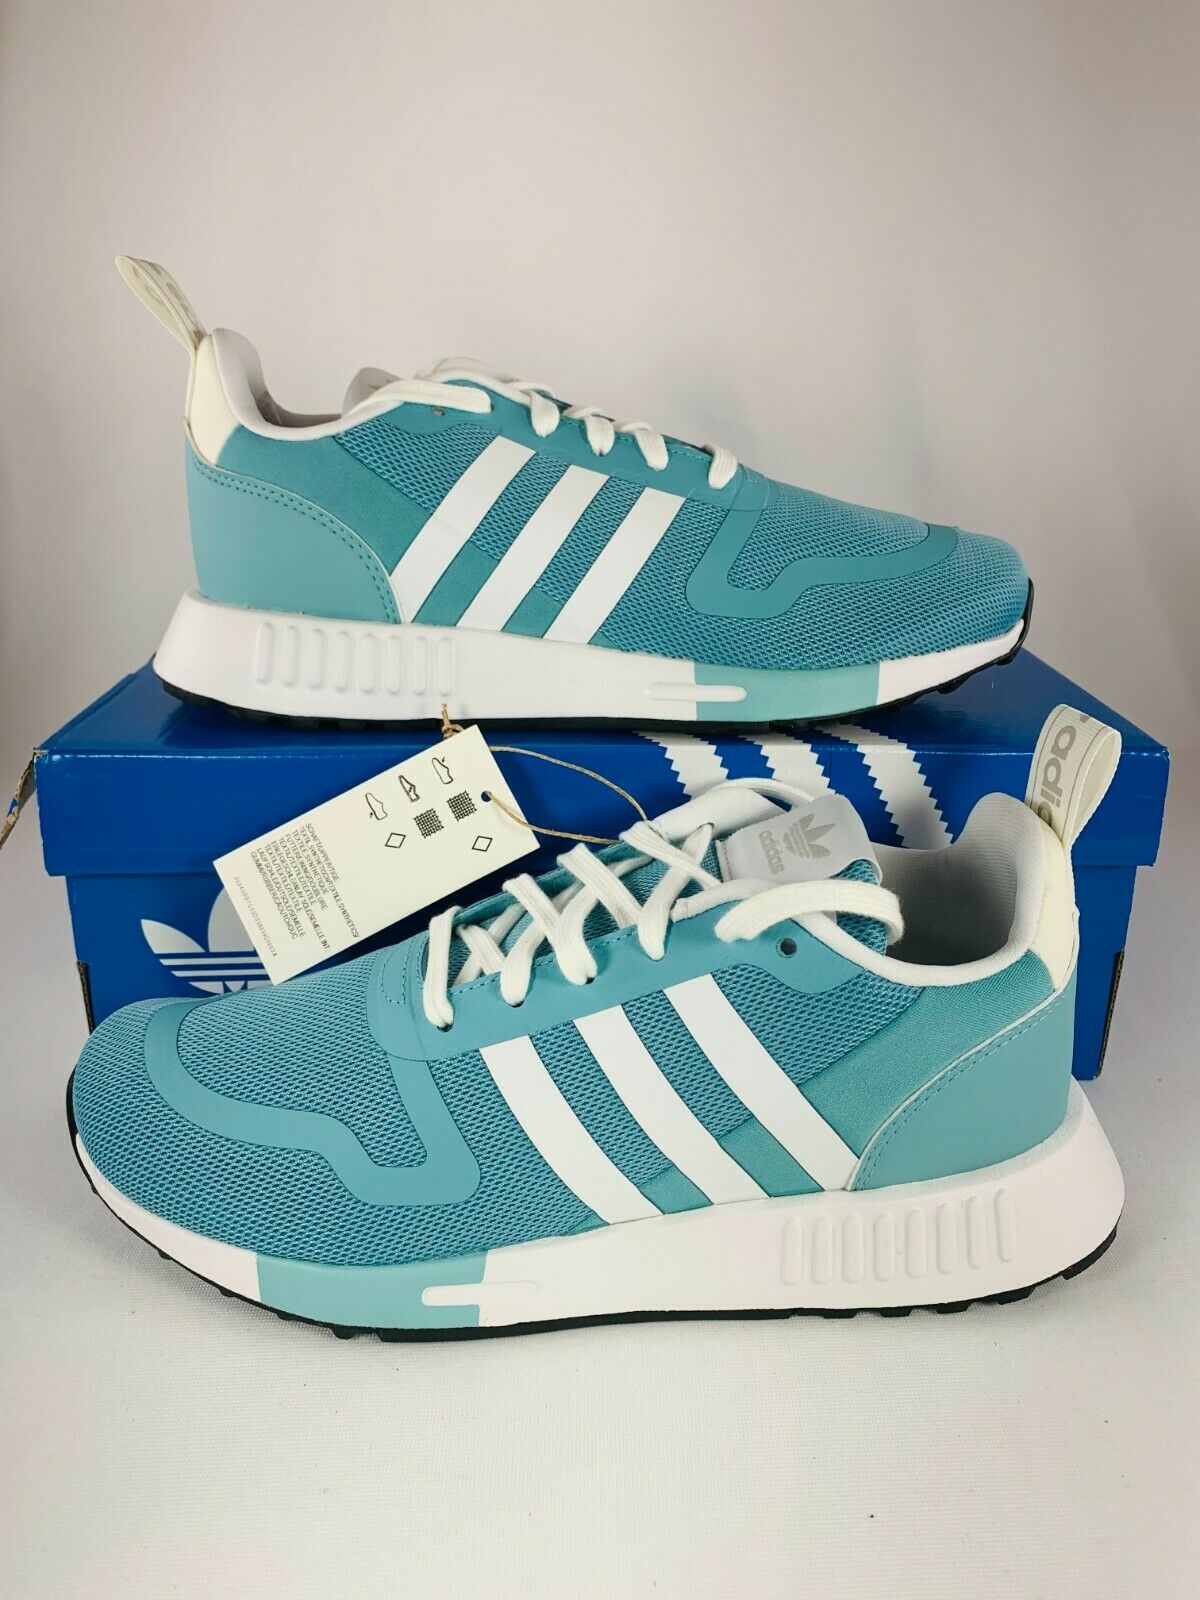 Adidas Multix Mint Ton Teal Shoes (Women's US Size 7.5) New Sneakers, H04494